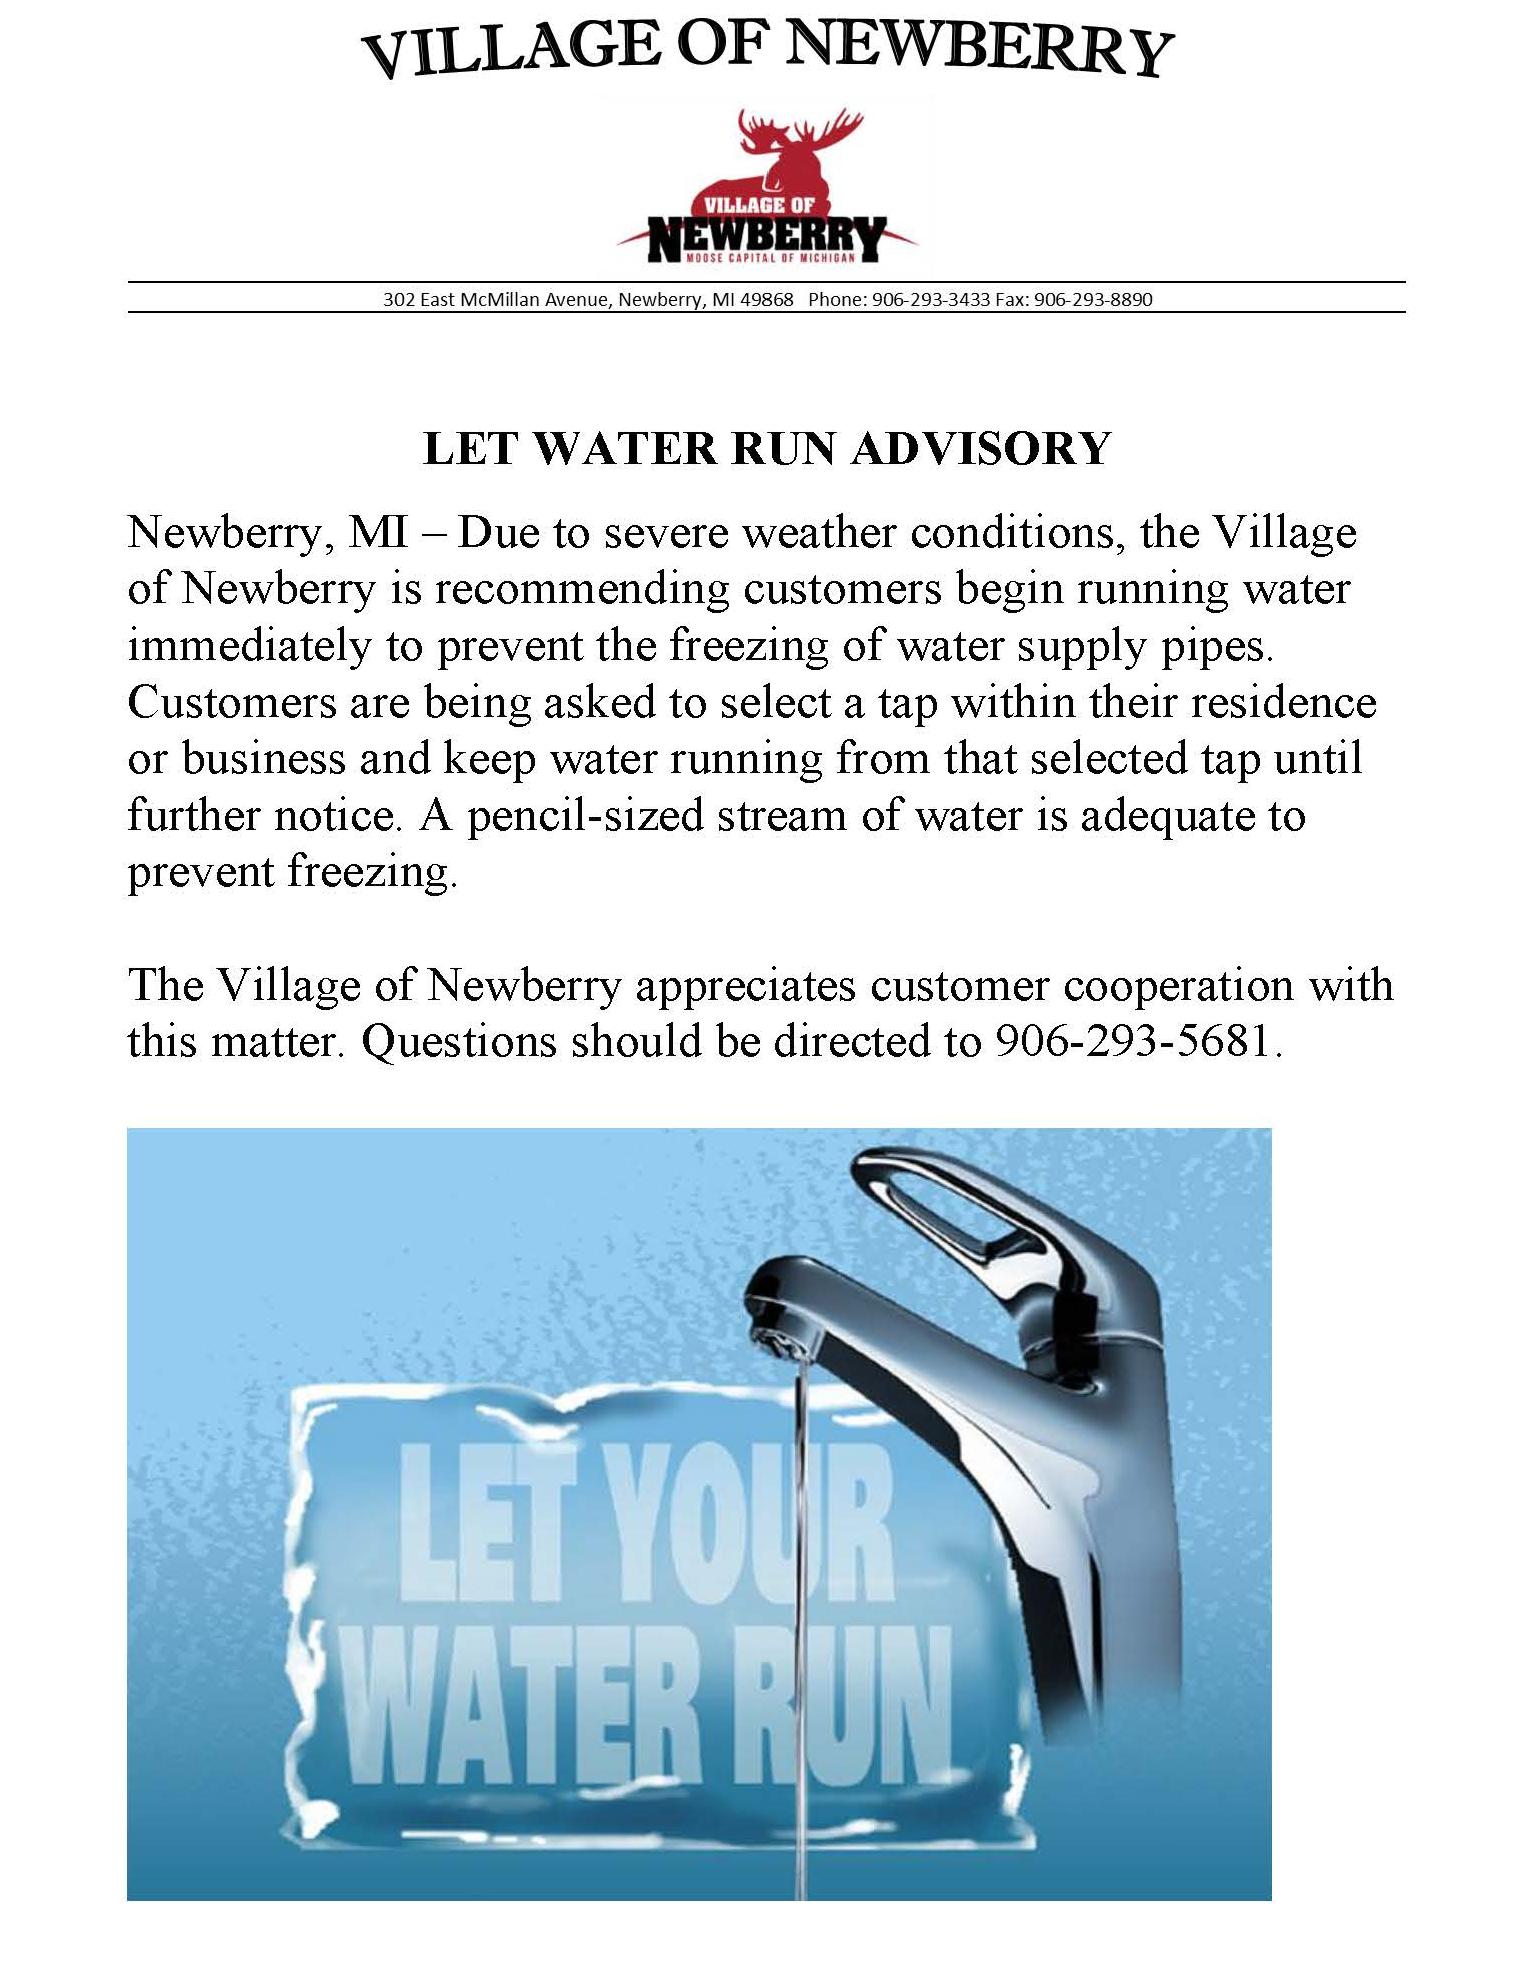 Let Water Run Advisory Posting for office JAN 2022 - Copy